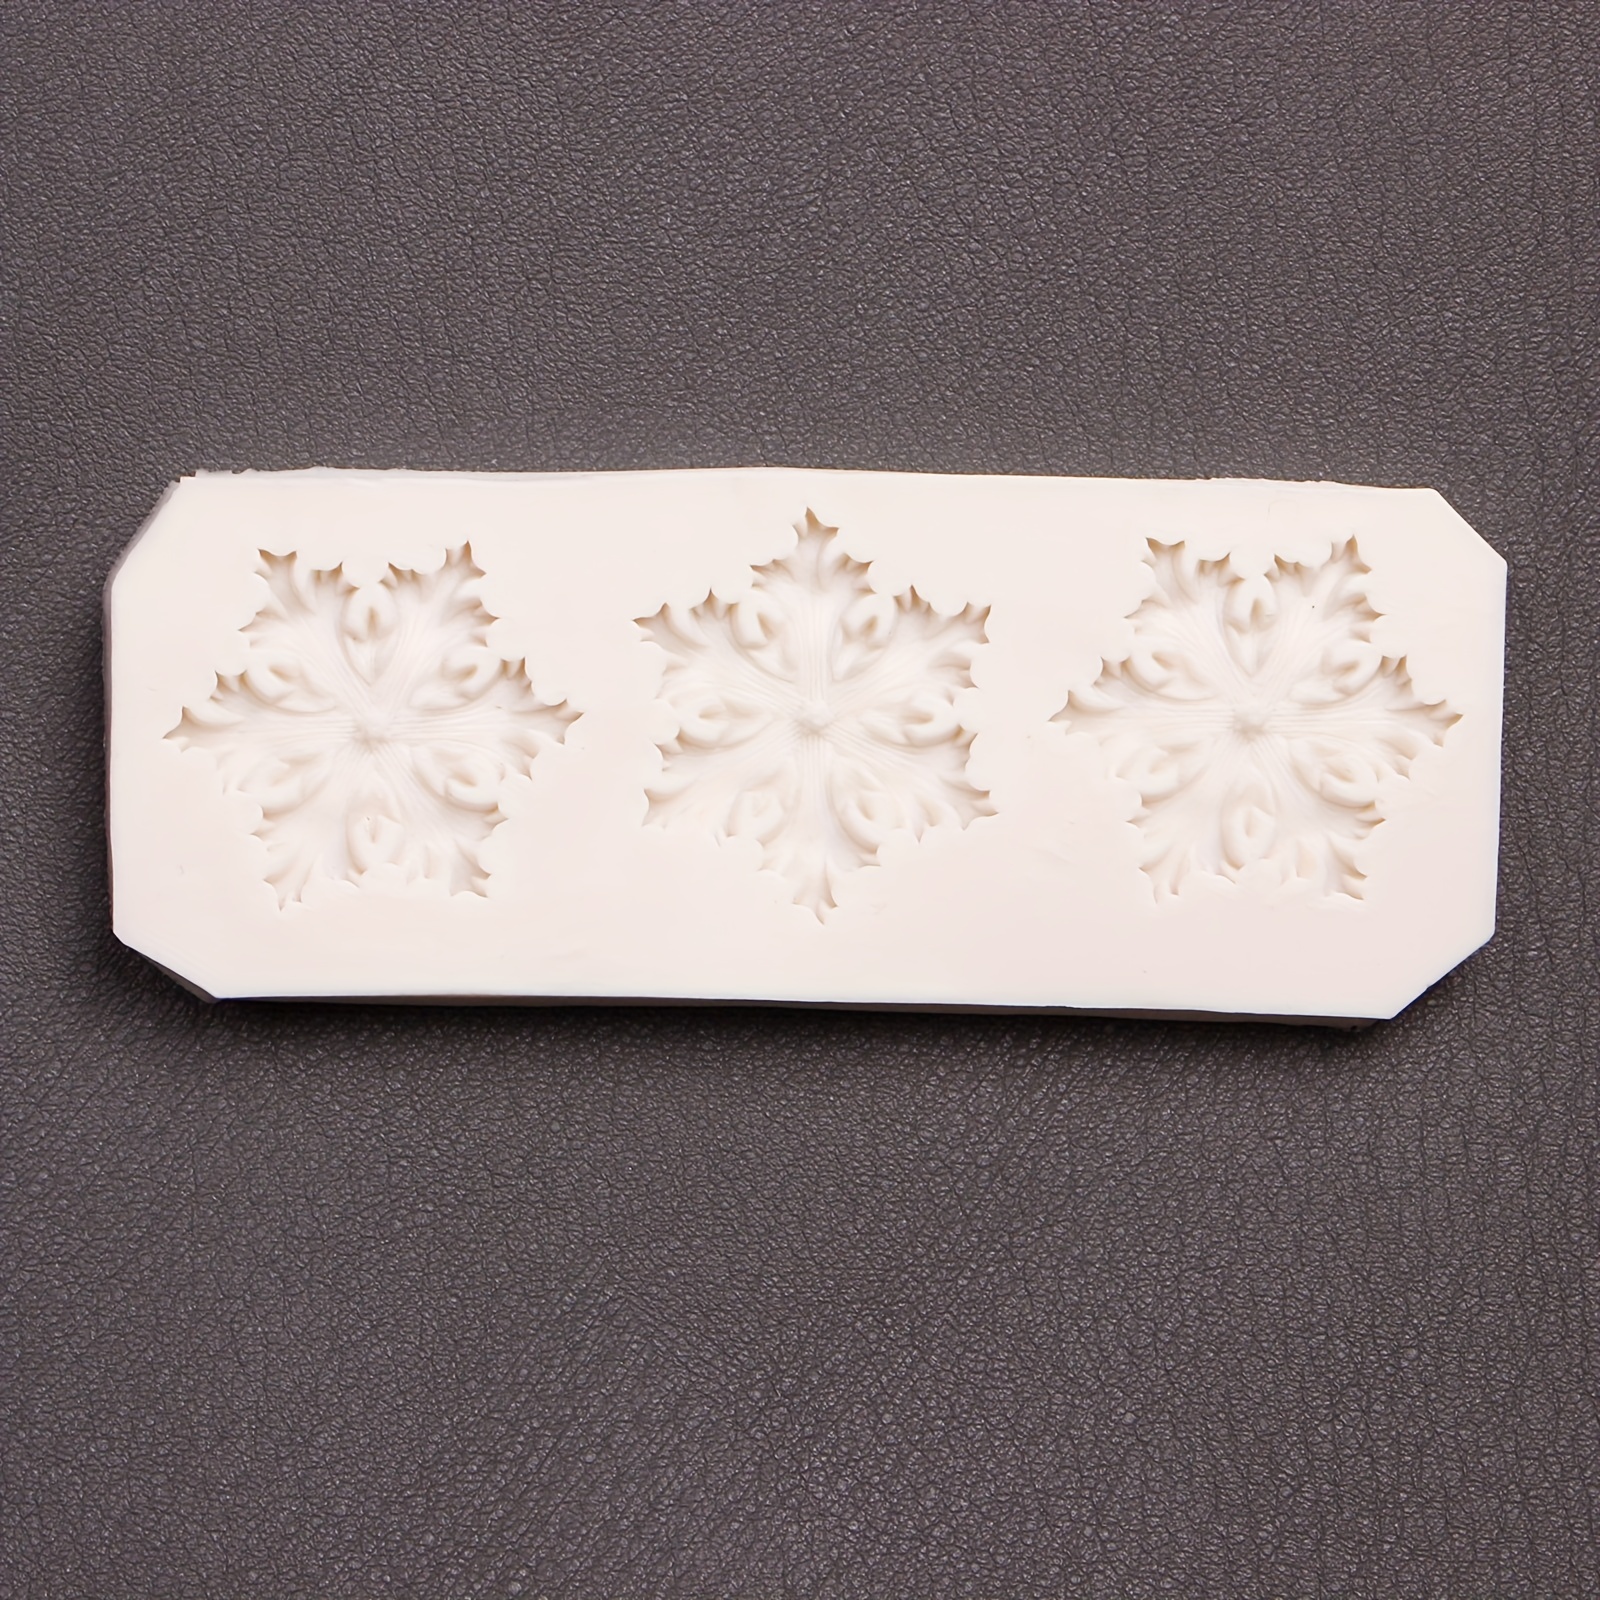 Silicone Snowflake Mold,sugarcraft Molds, Polymer Clay,soap Molds,  Candy,chocolate, Fondant Molds,cake Decorating Tools, Christmas 9 